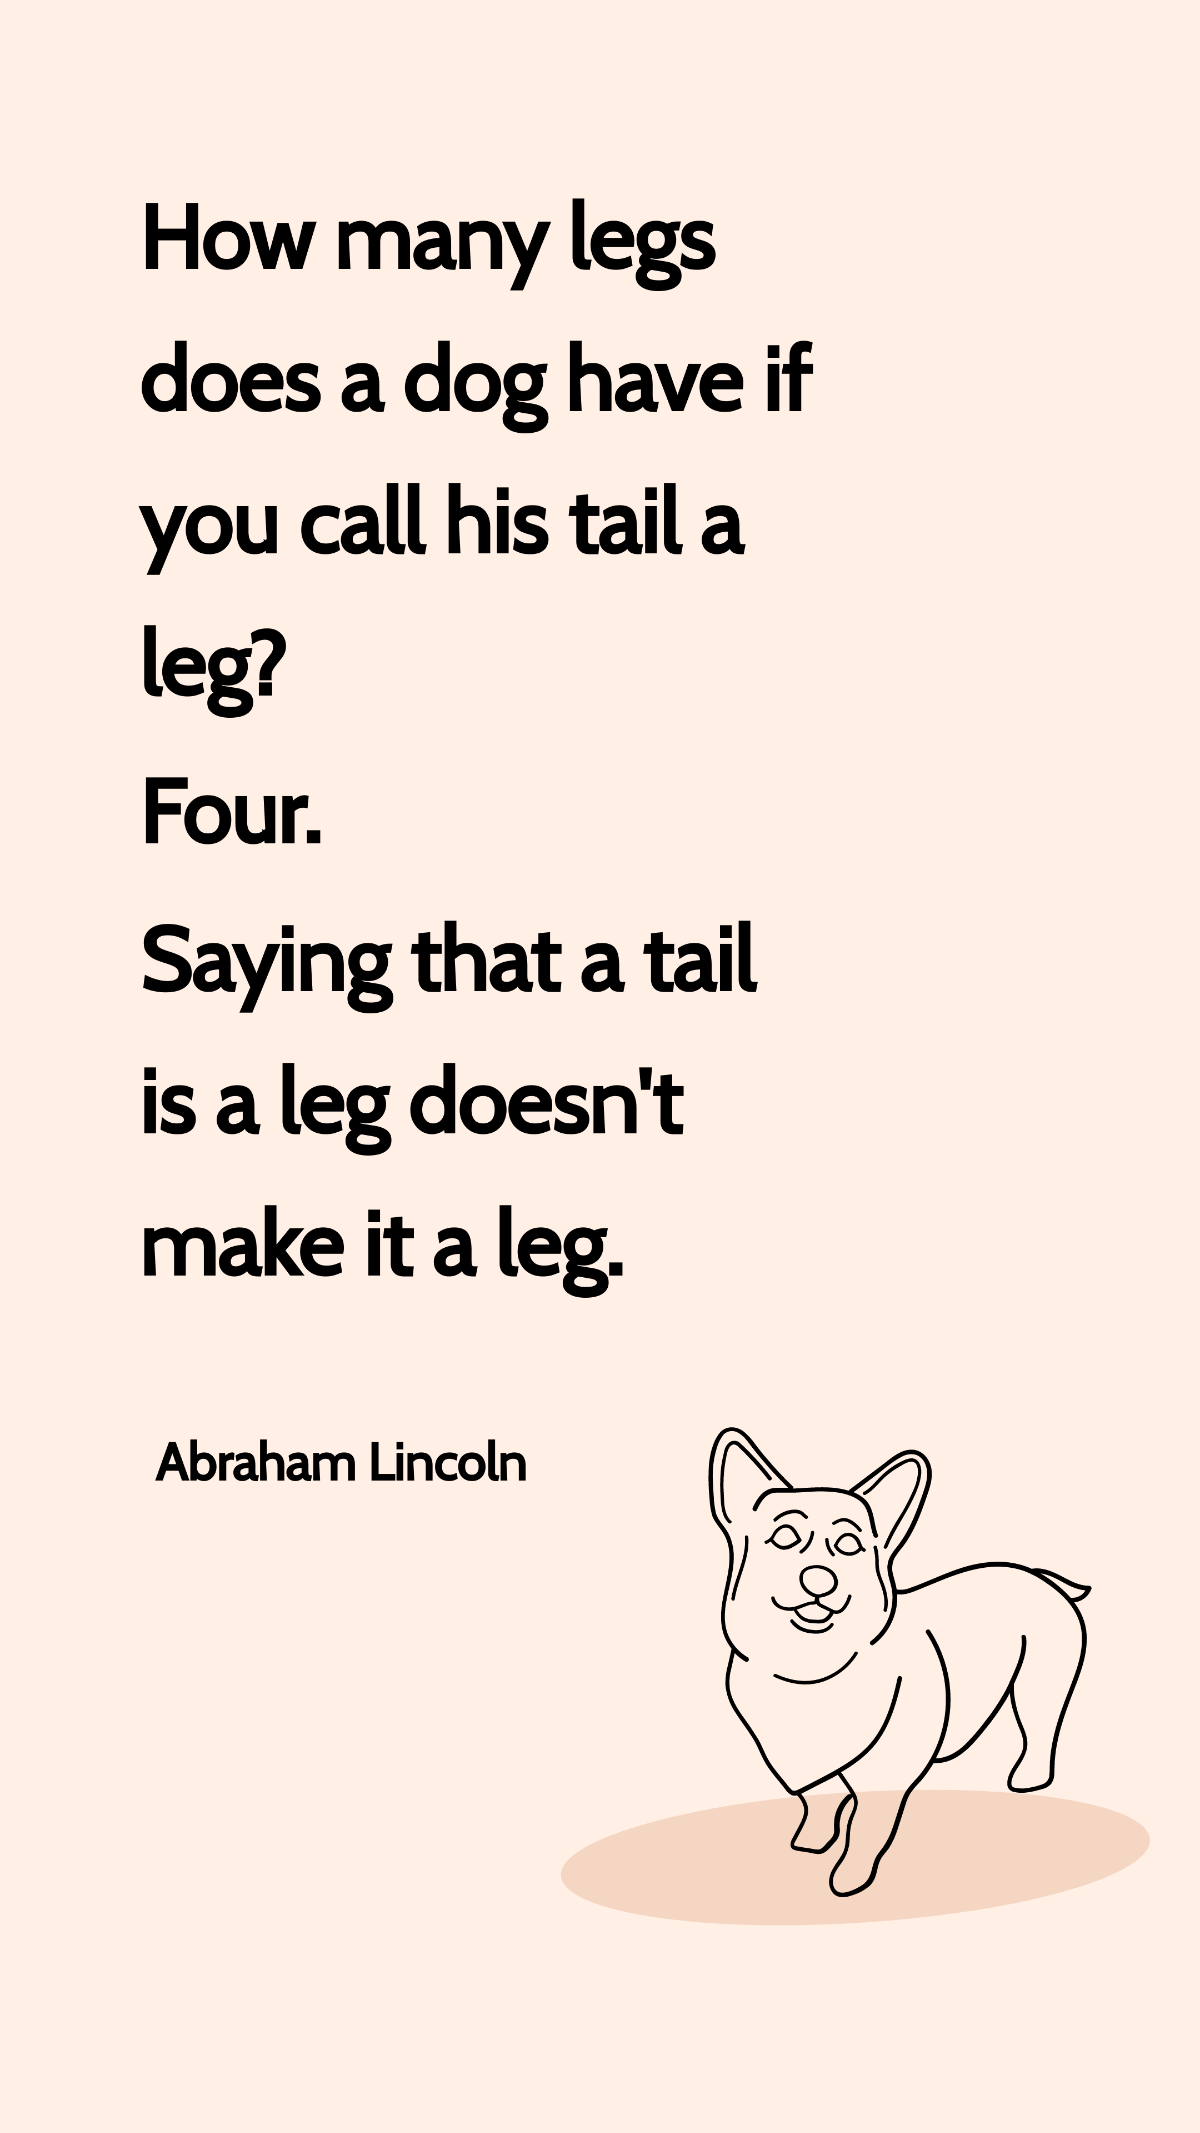 Abraham Lincoln - How many legs does a dog have if you call his tail a leg? Four. Saying that a tail is a leg doesn't make it a leg. Template